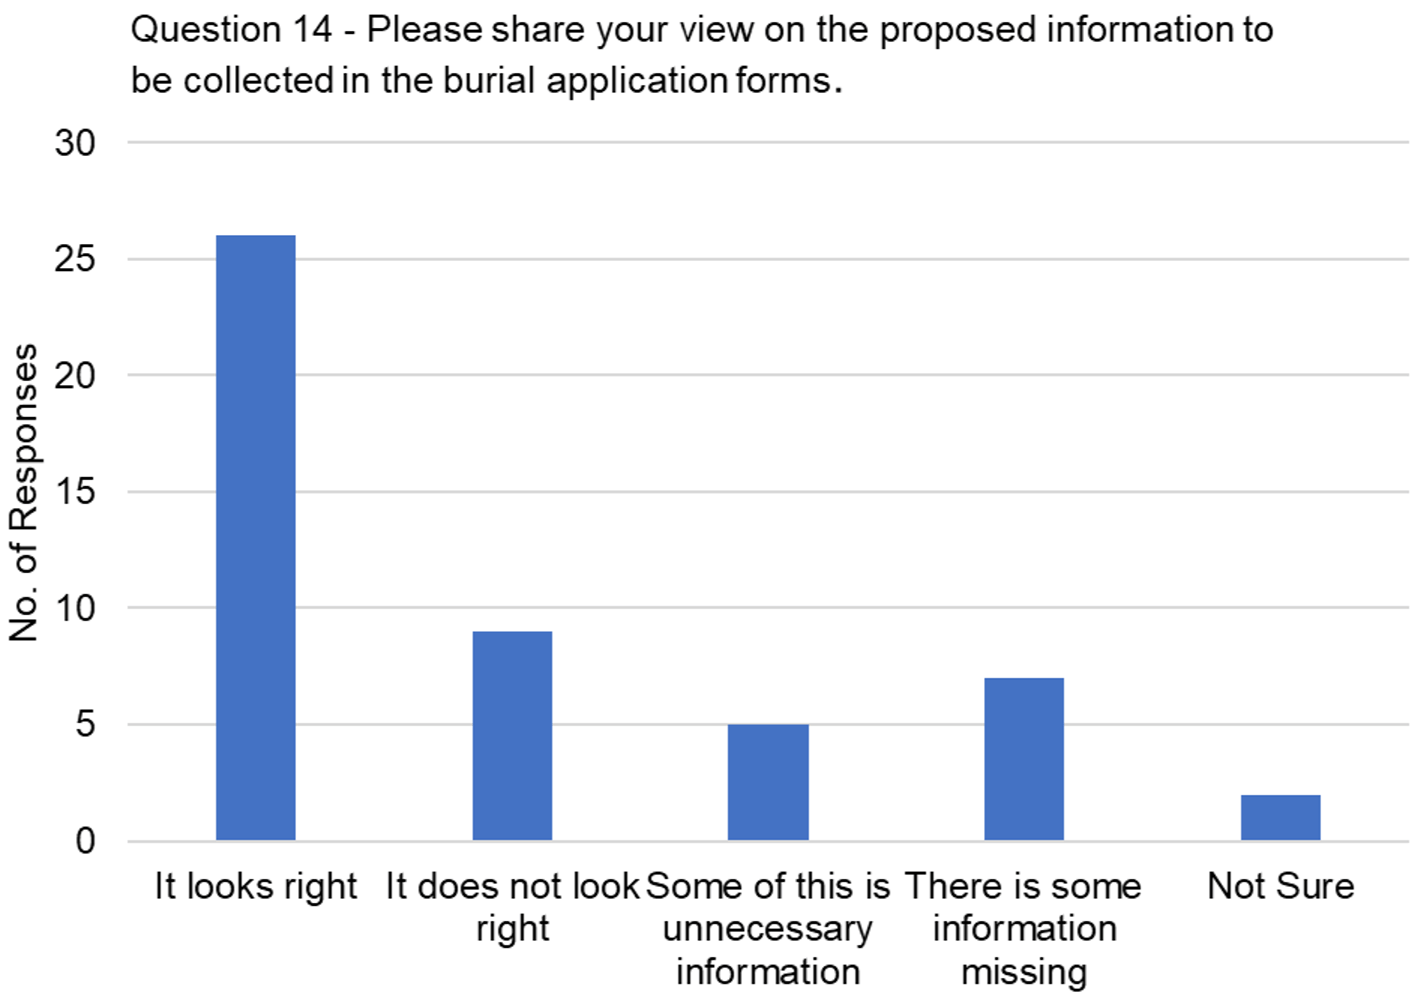 The graph visually presents the data from table 10, focussing on the responses to the question, "Please share your view on the proposed information to be collected in the burial application forms."